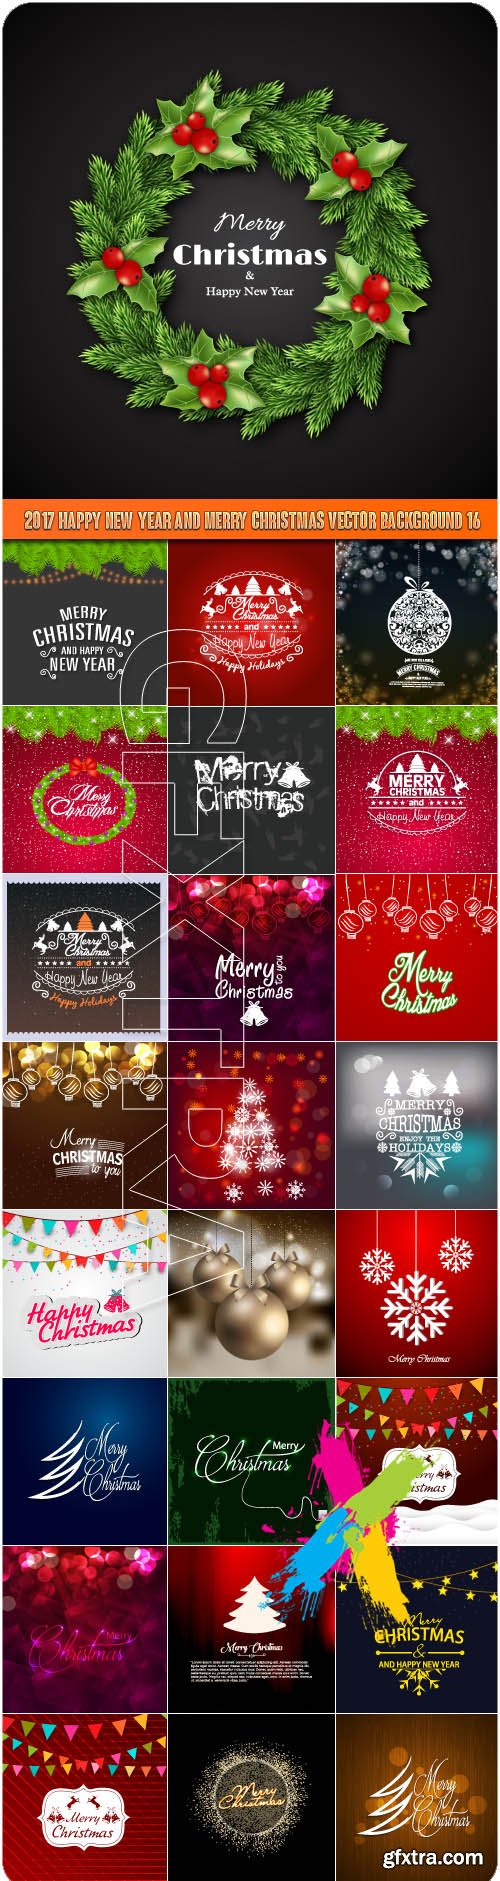 2017 Happy New Year and Merry Christmas vector background 16